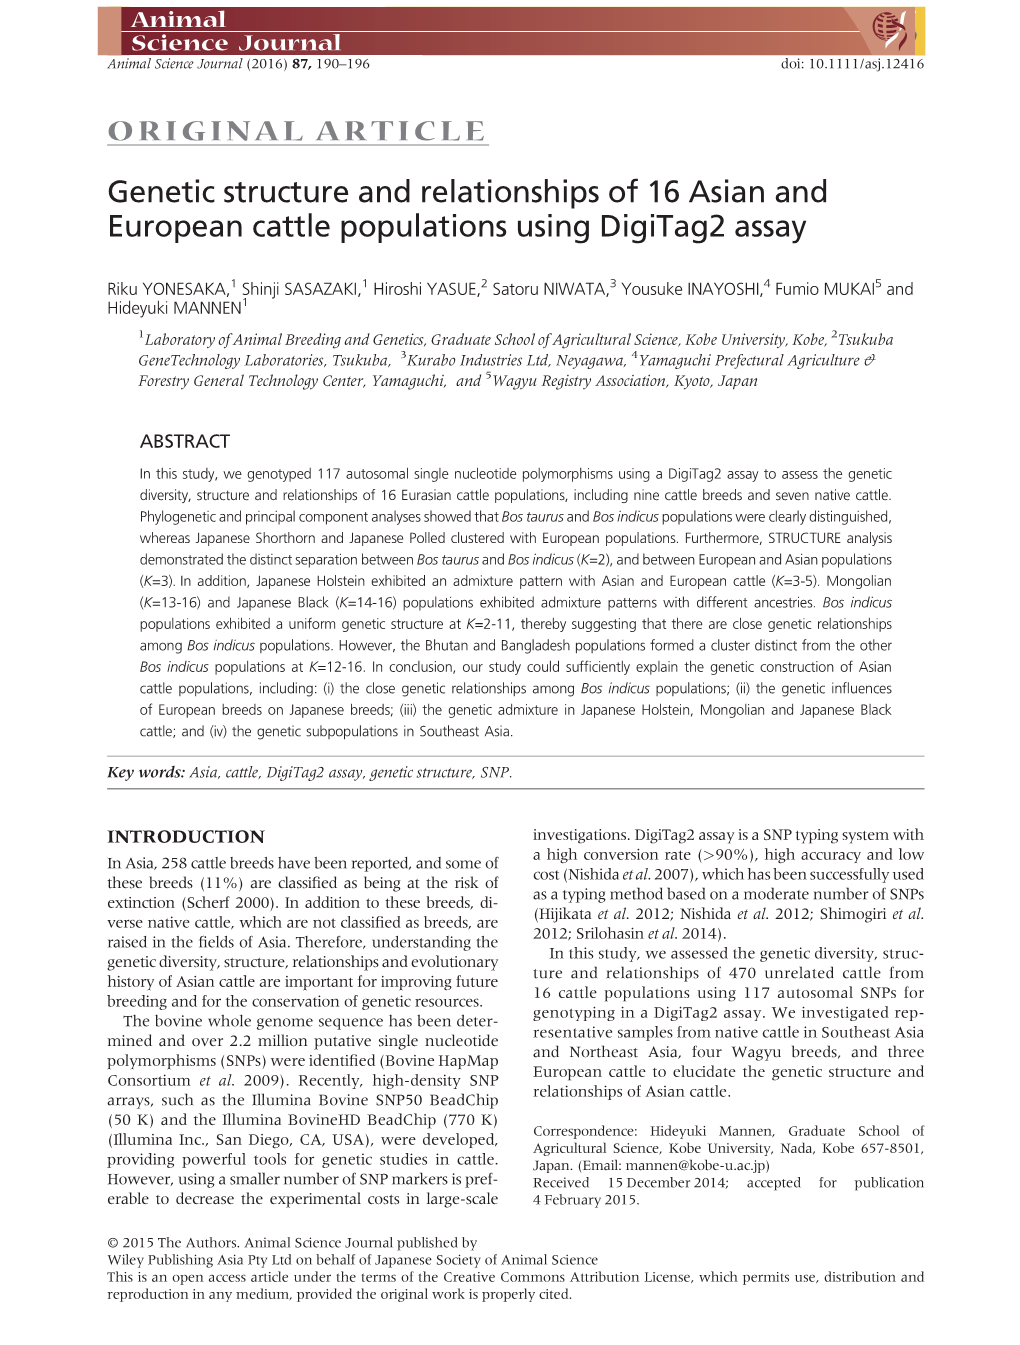 Genetic Structure and Relationships of 16 Asian and European Cattle Populations Using Digitag2 Assay